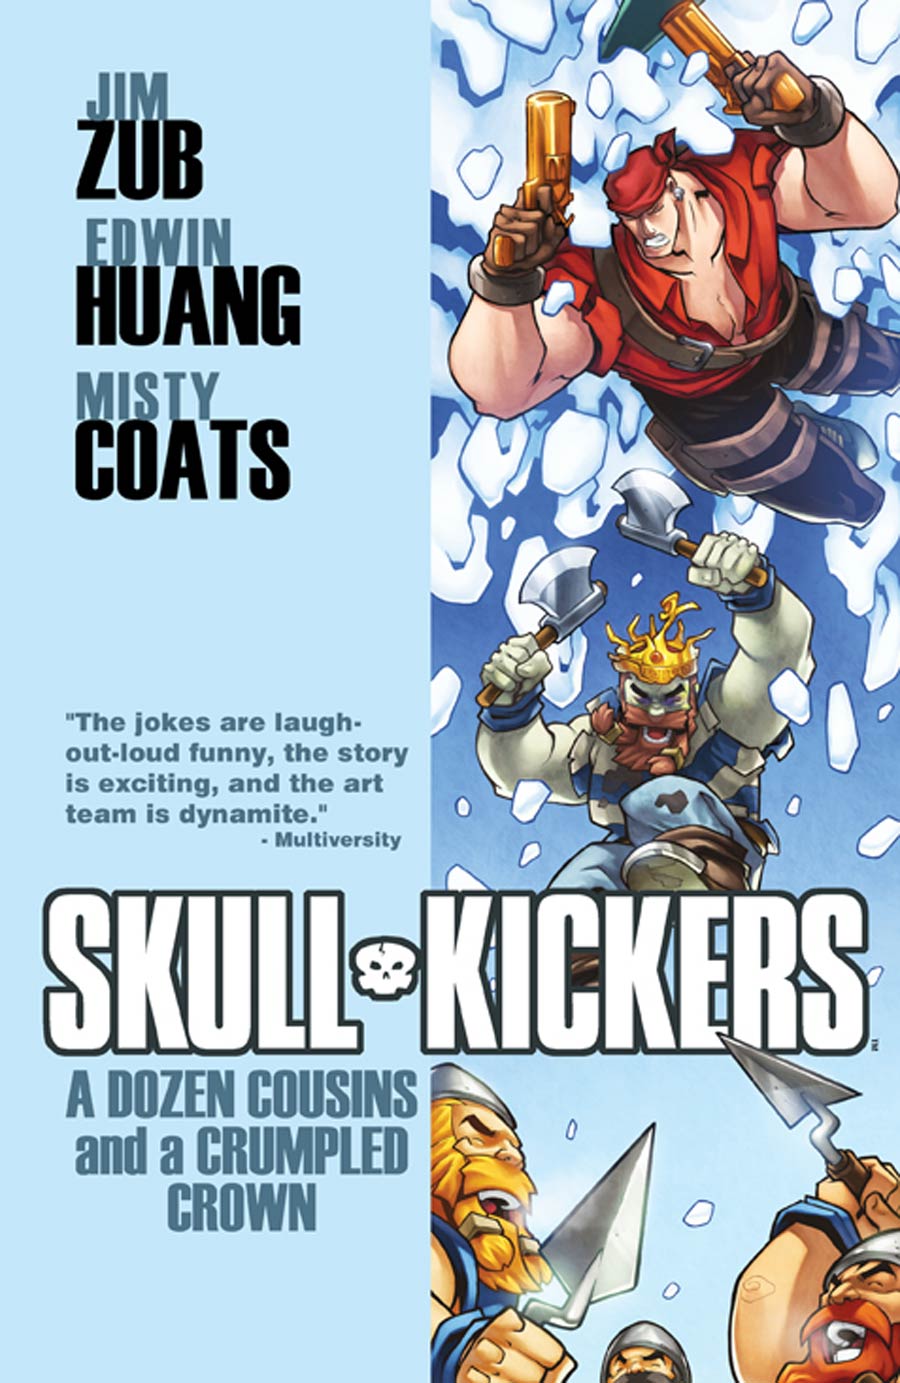 Skullkickers Vol 5 A Dozen Cousins And A Crumpled Crown TP